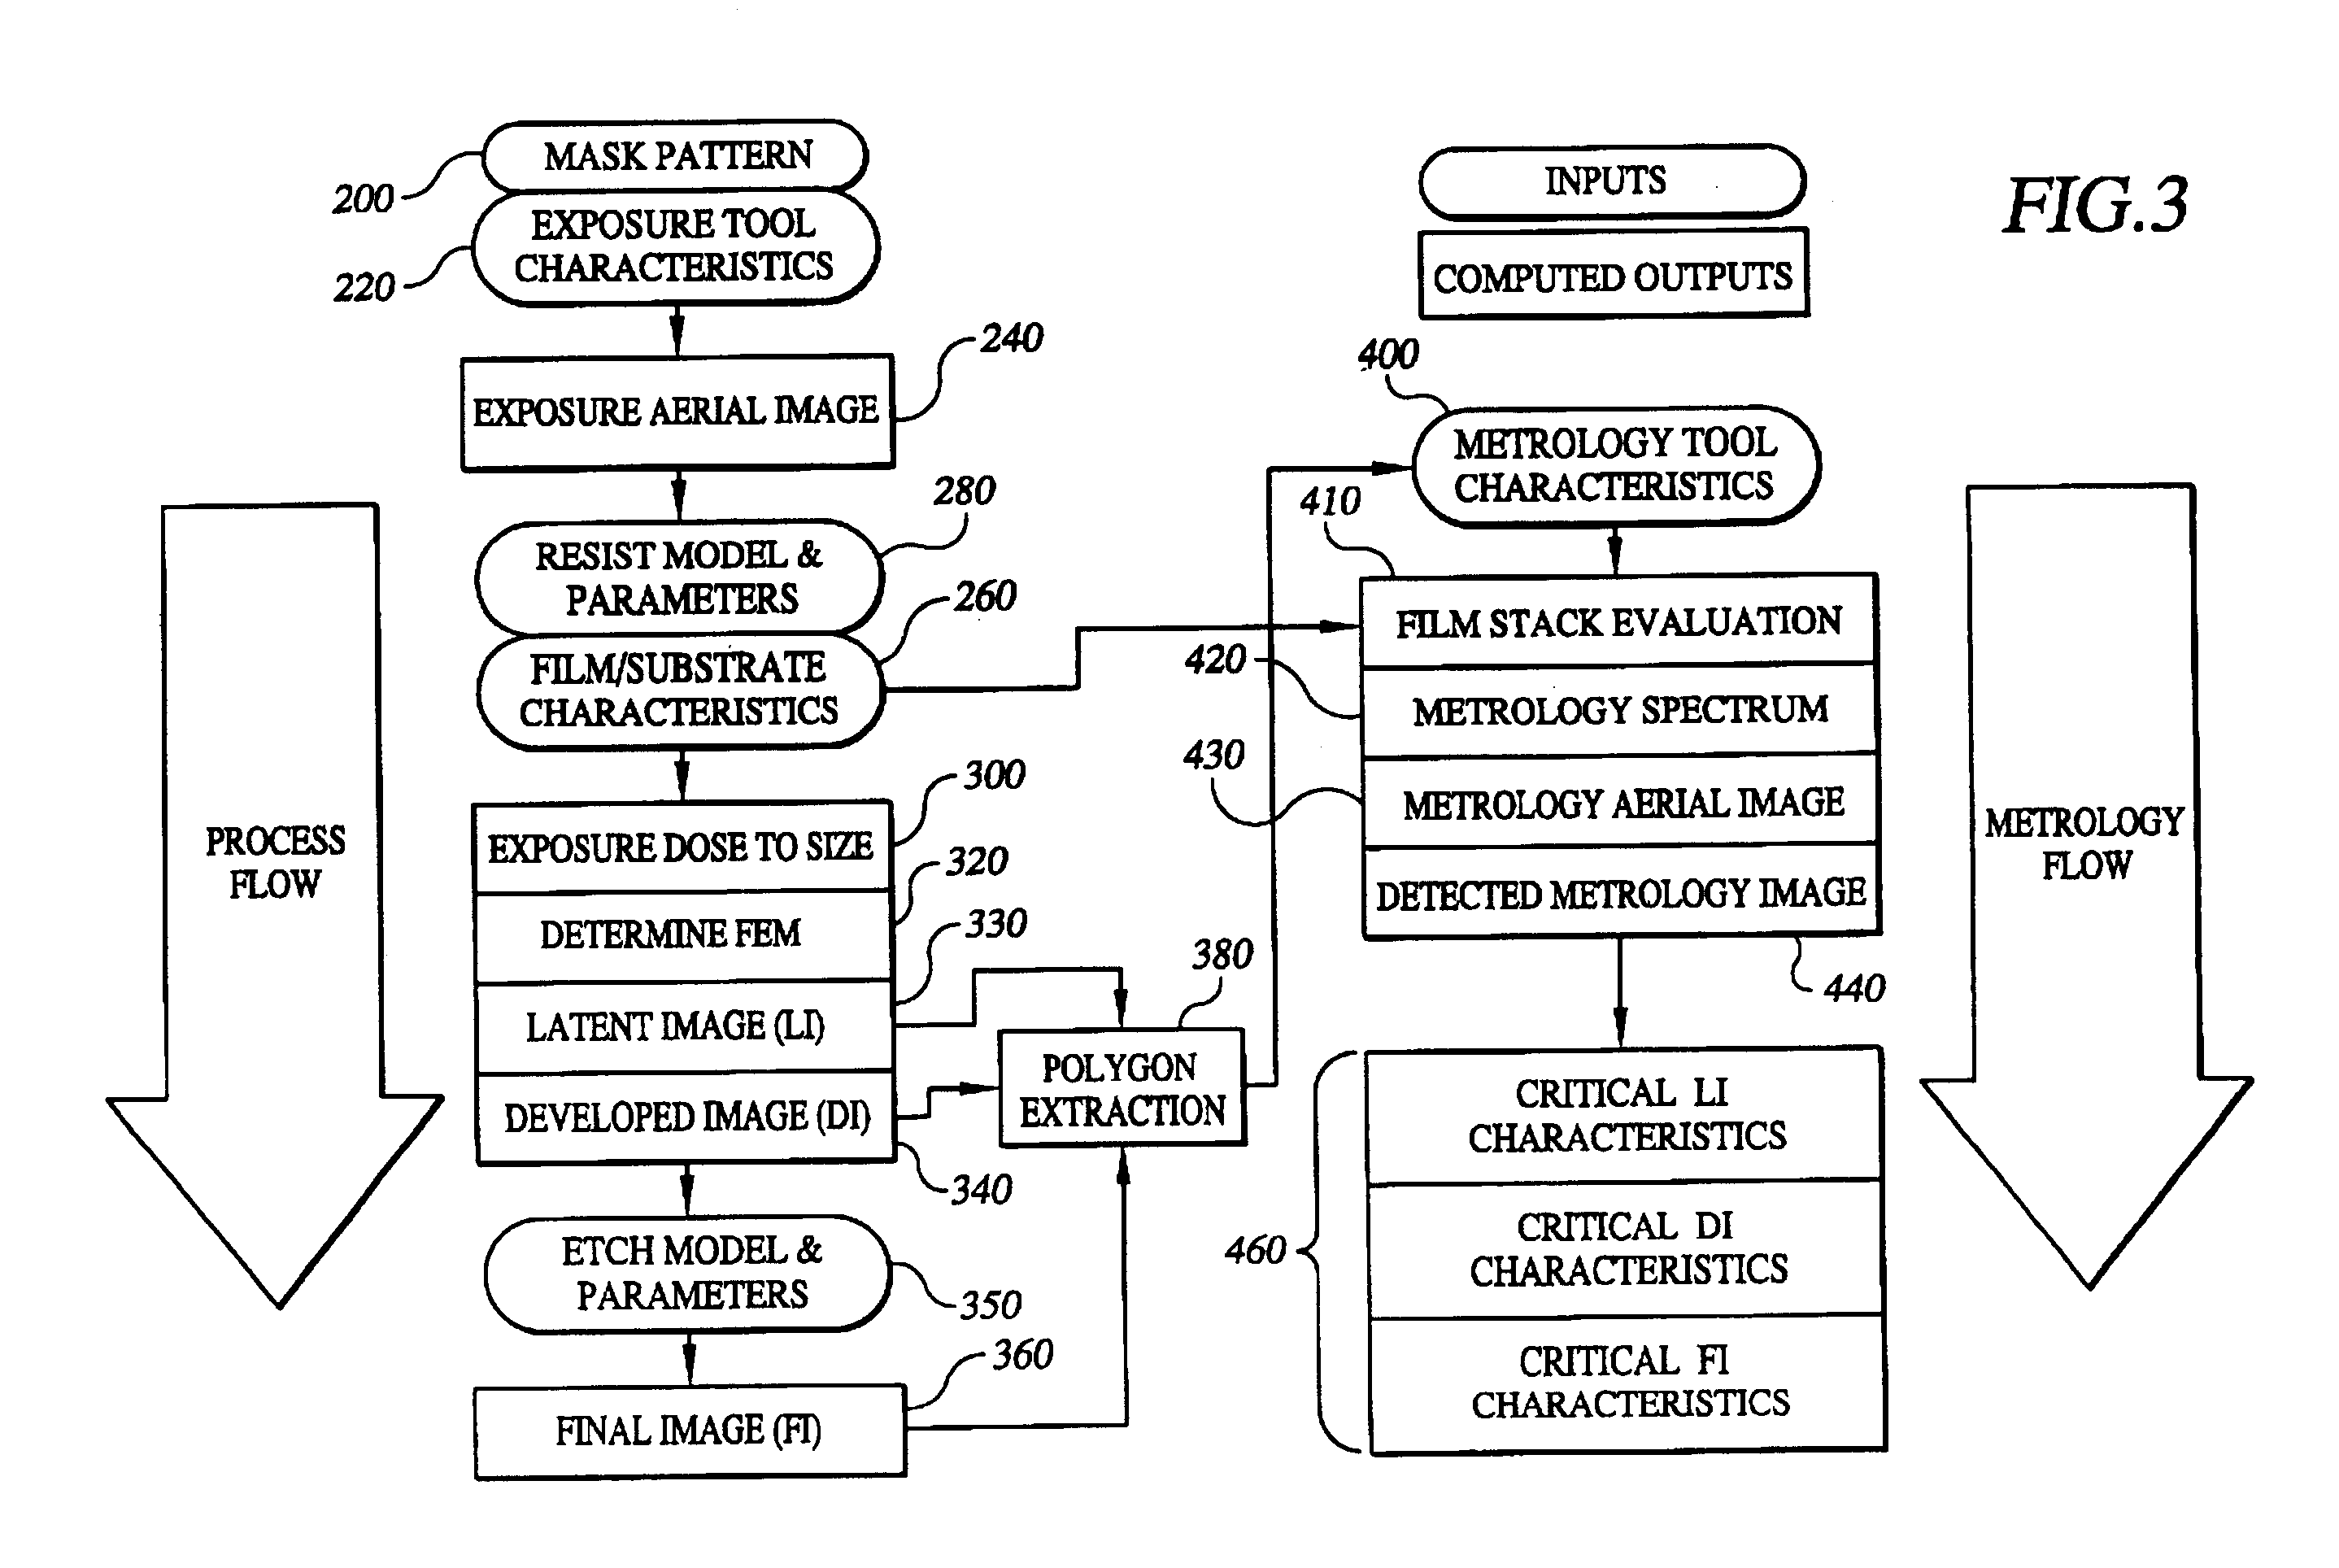 Integrated lithographic print and detection model for optical CD